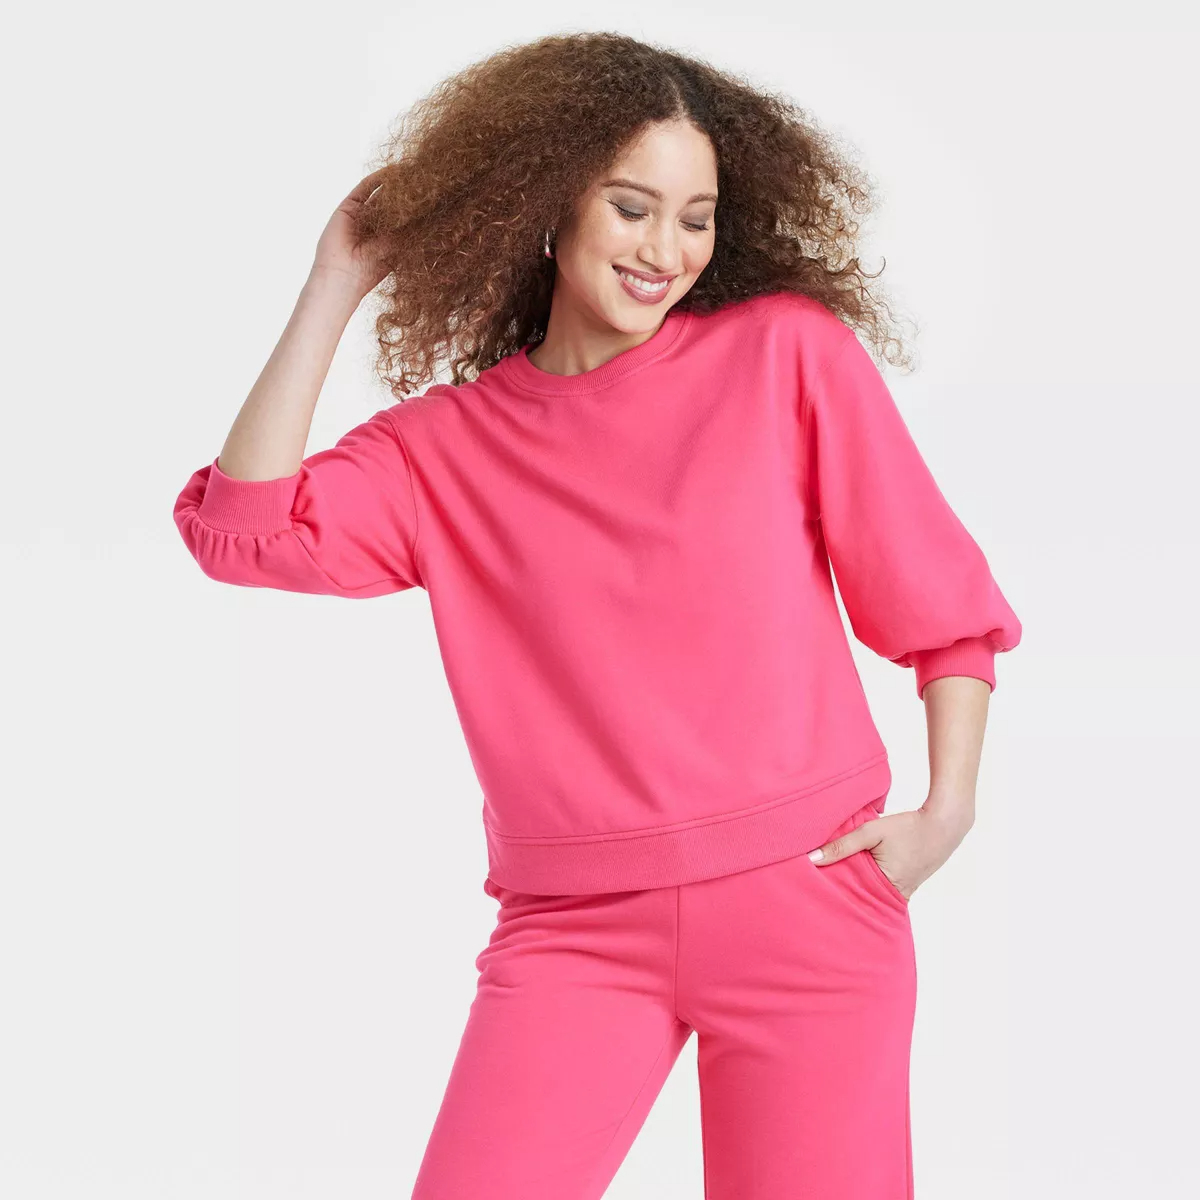 model in the pink sweatshirt and matching pants